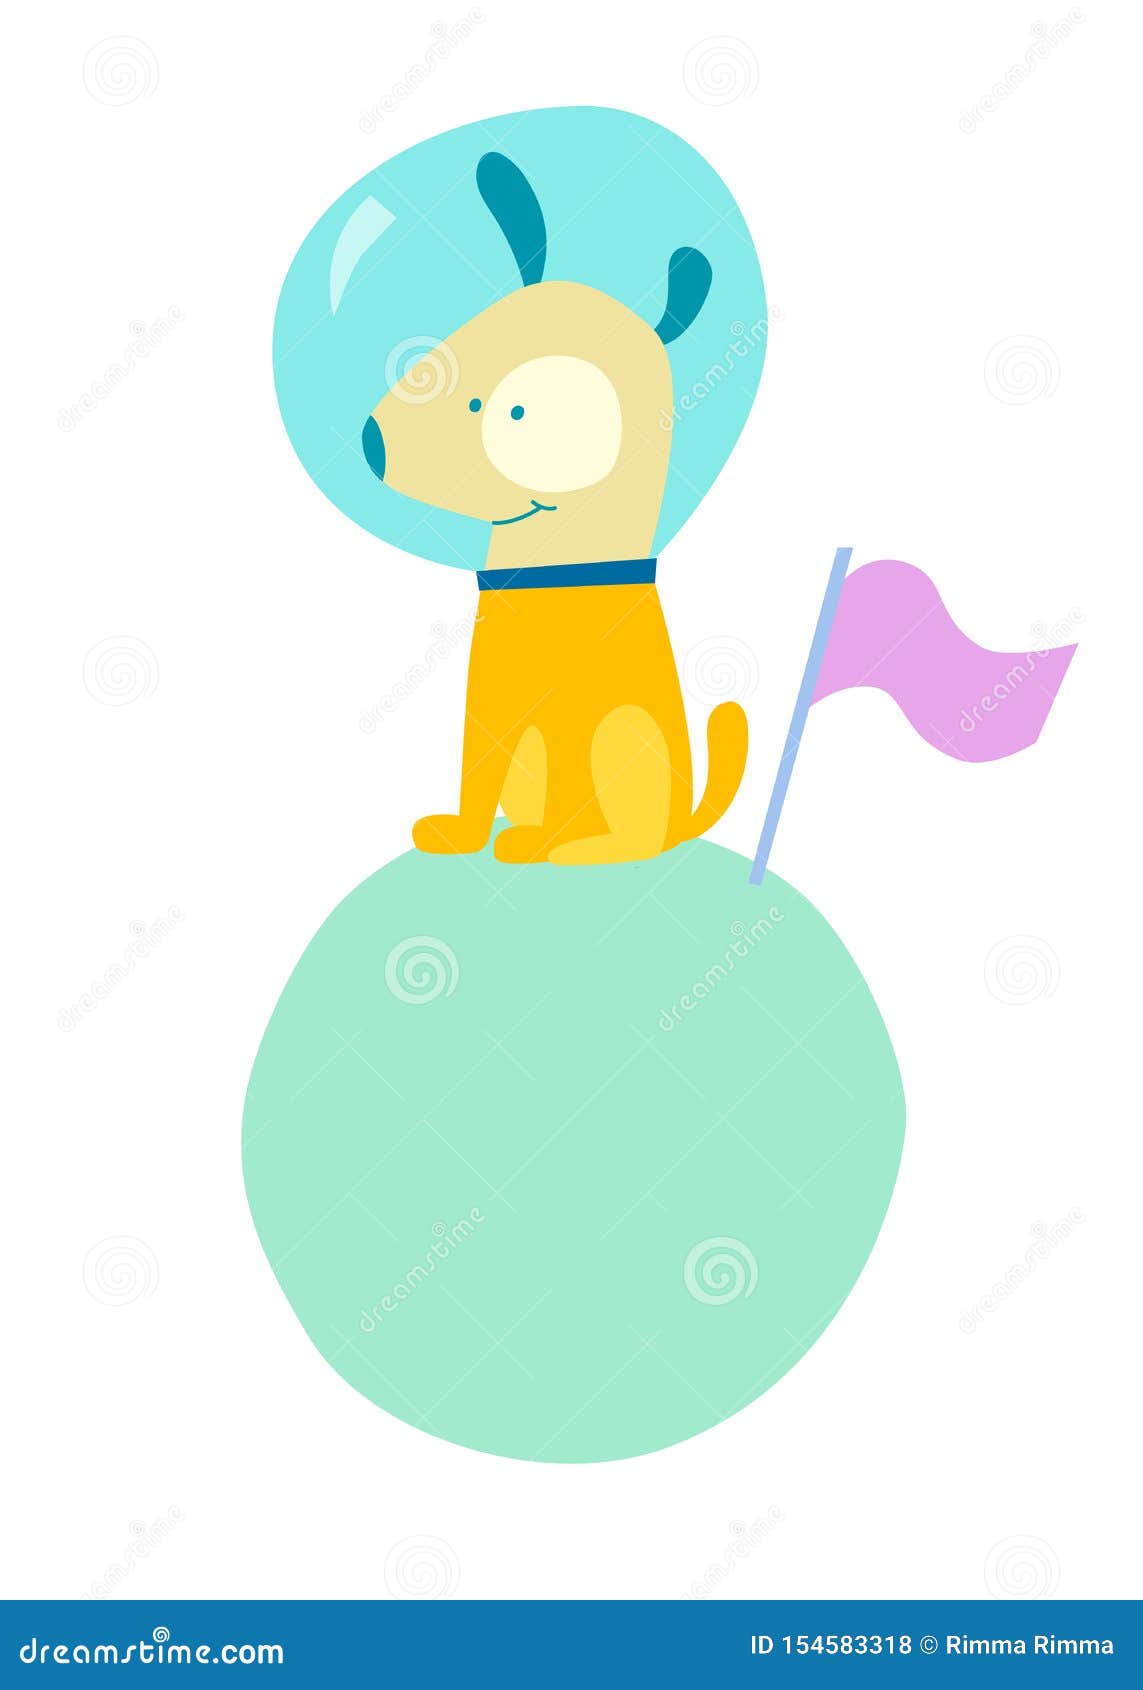 Dog in a Space Suit Vector Illustration Icon Stock Vector